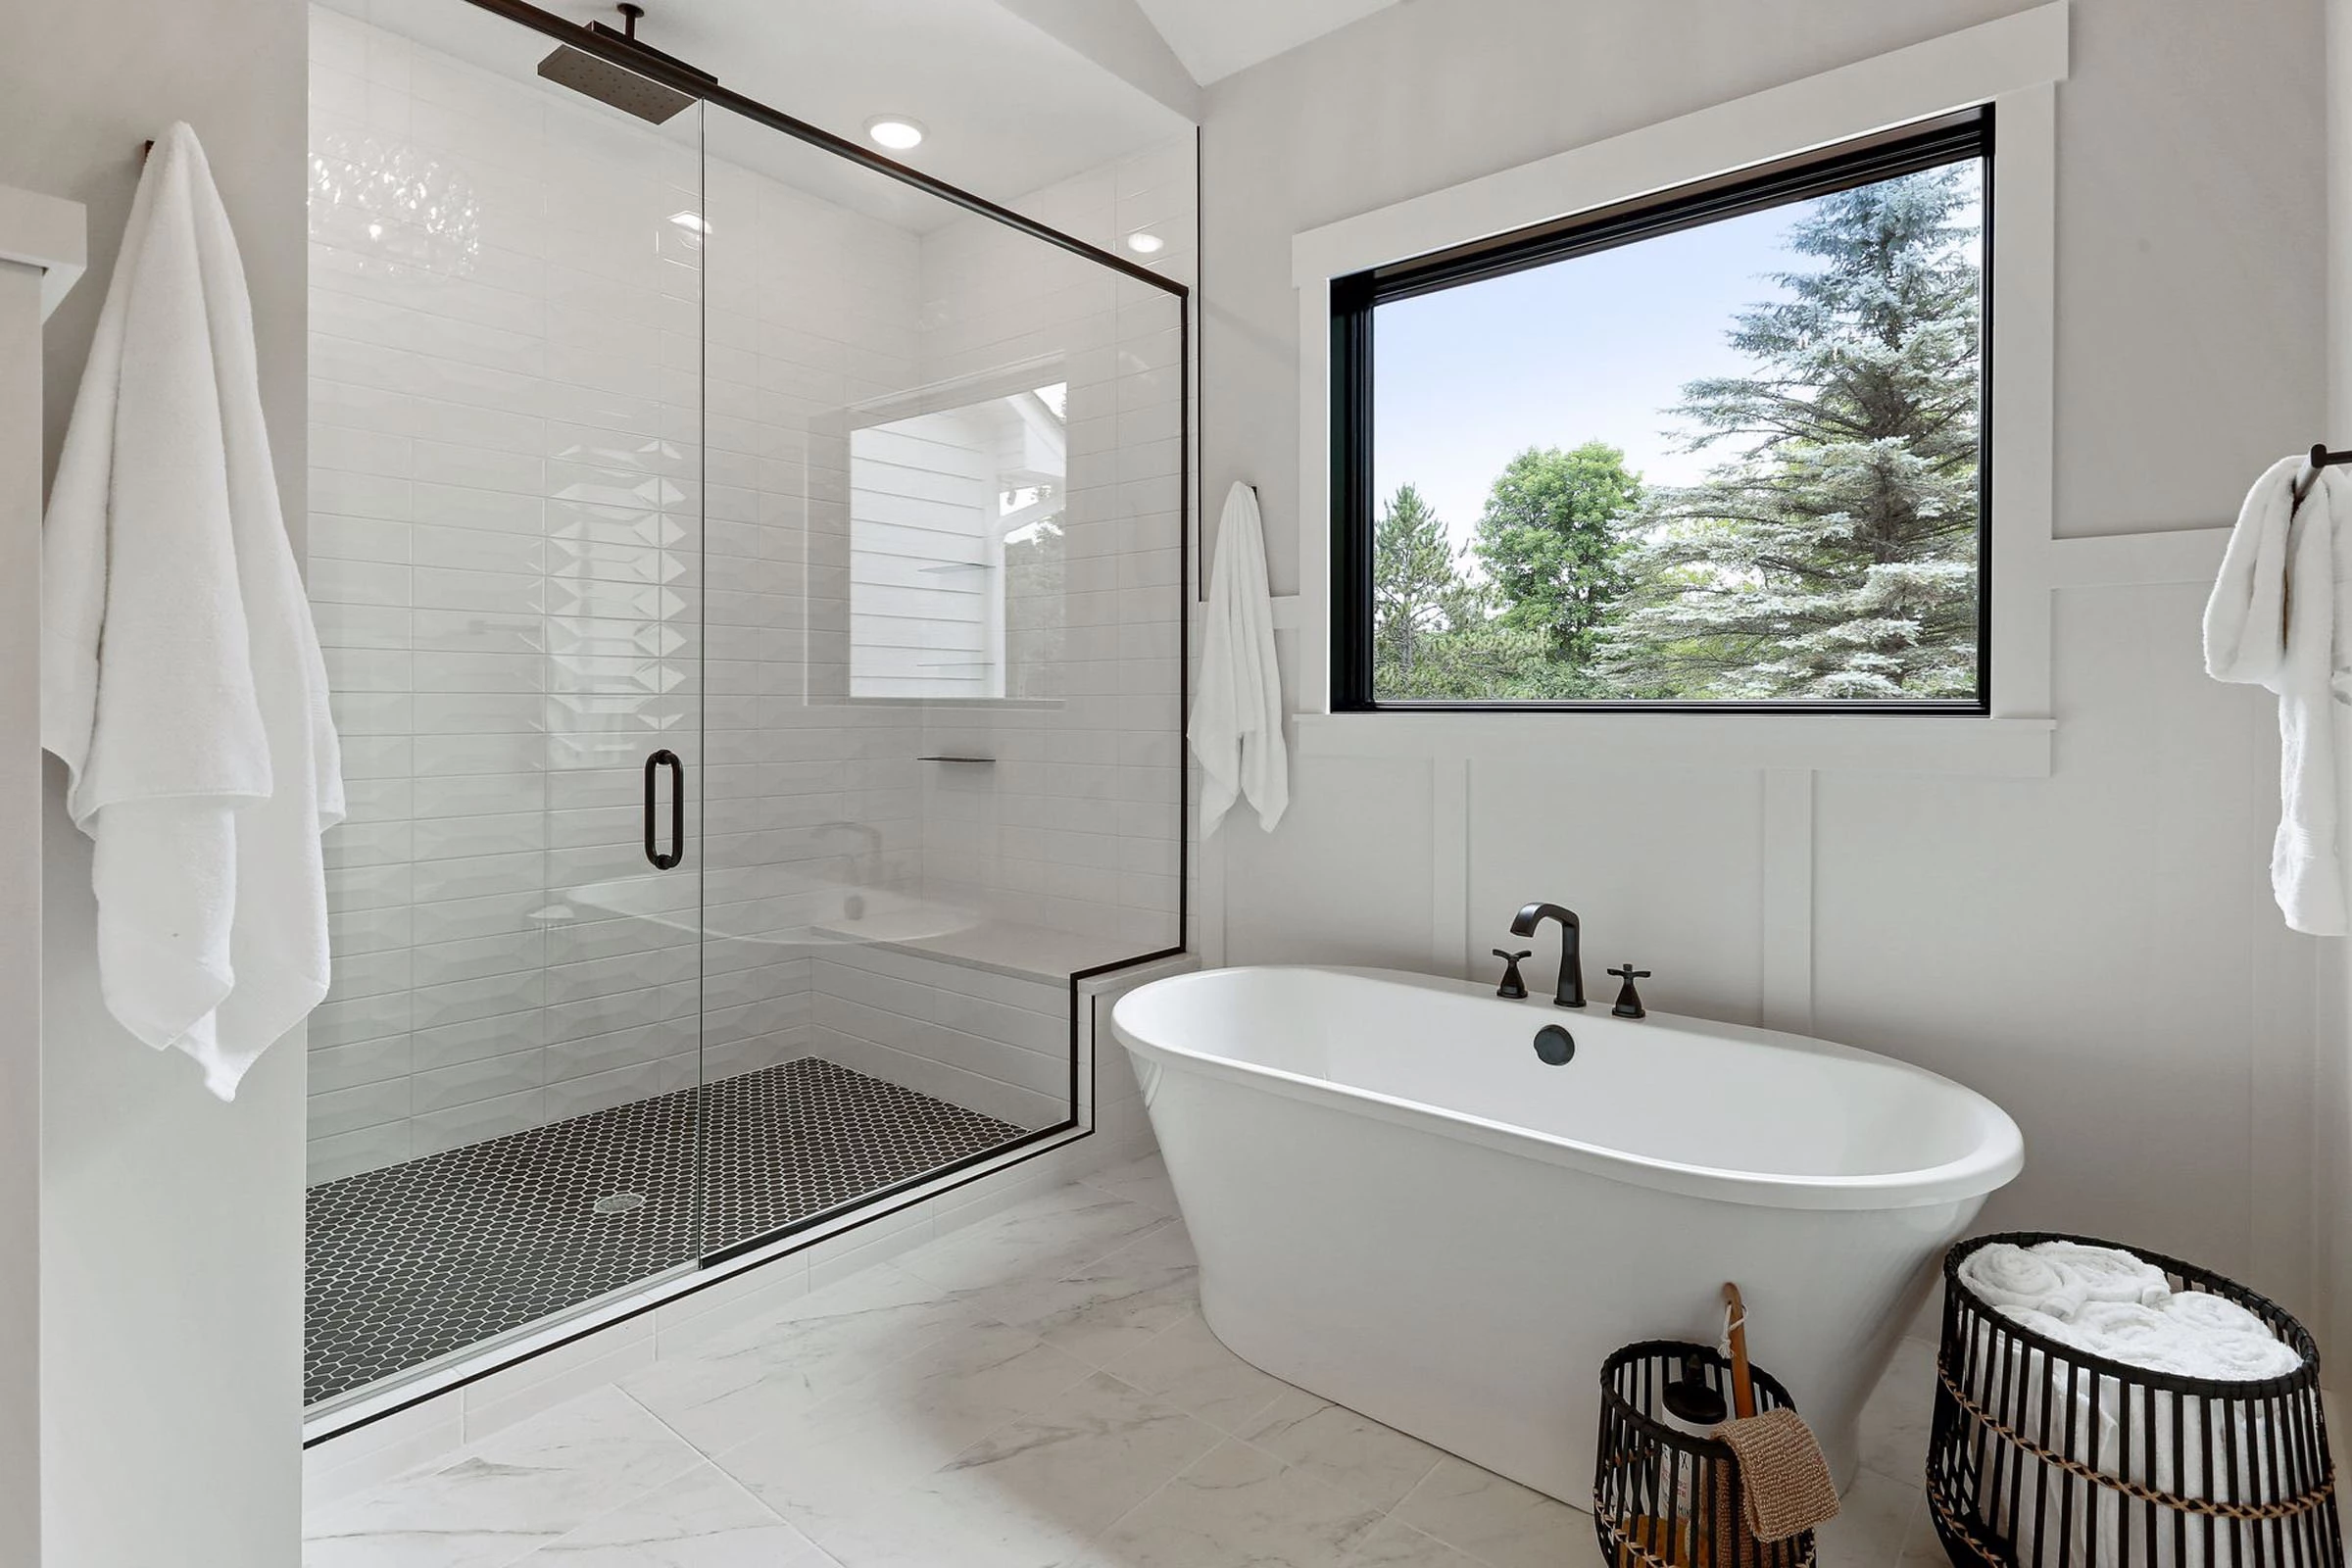 Walk-in shower and freestanding soaking tub